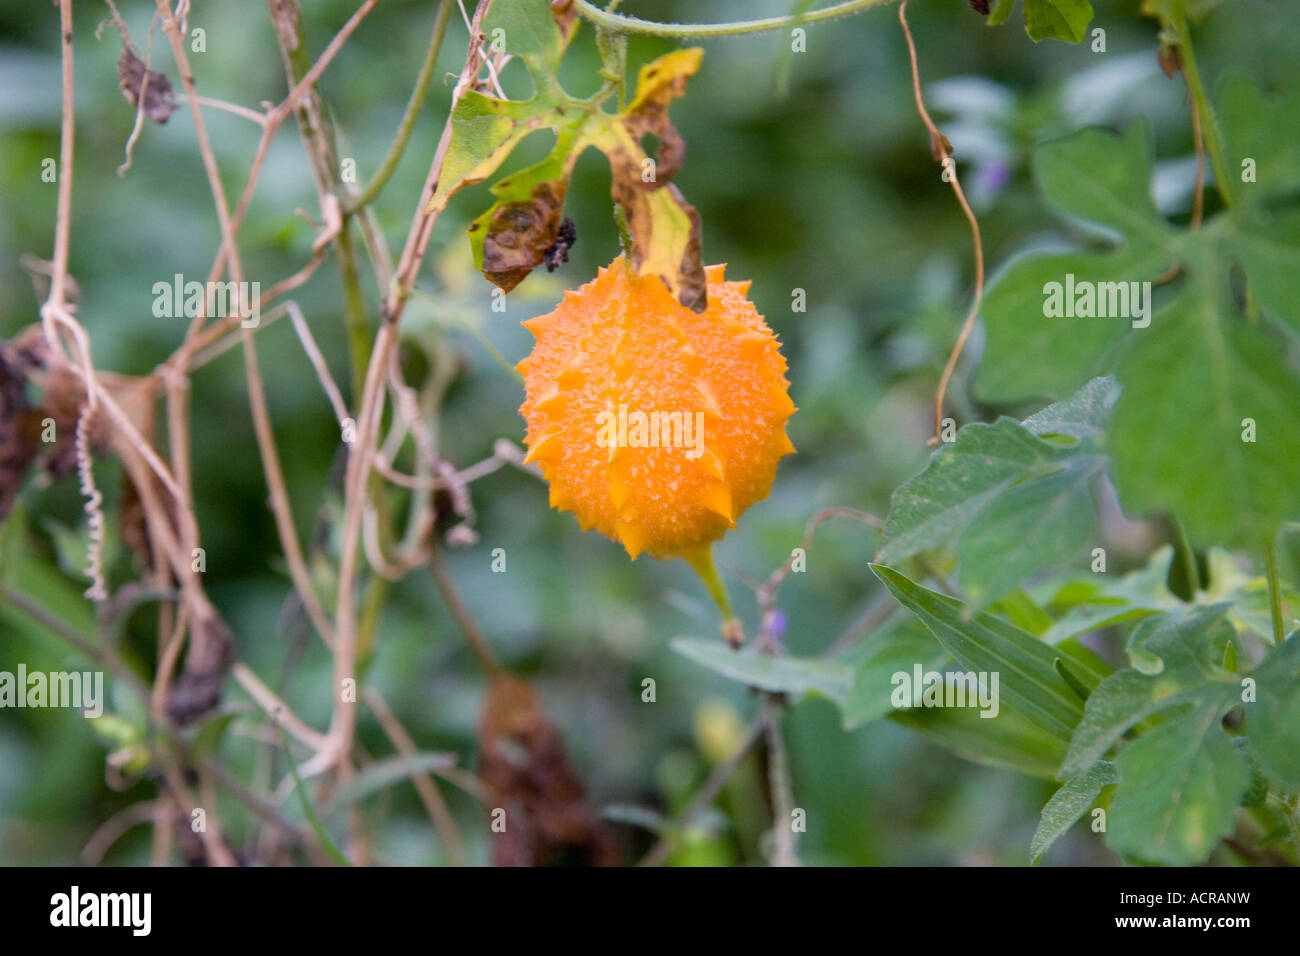 Momordica balsamina also known as the Balsam Apple. Stock Photo